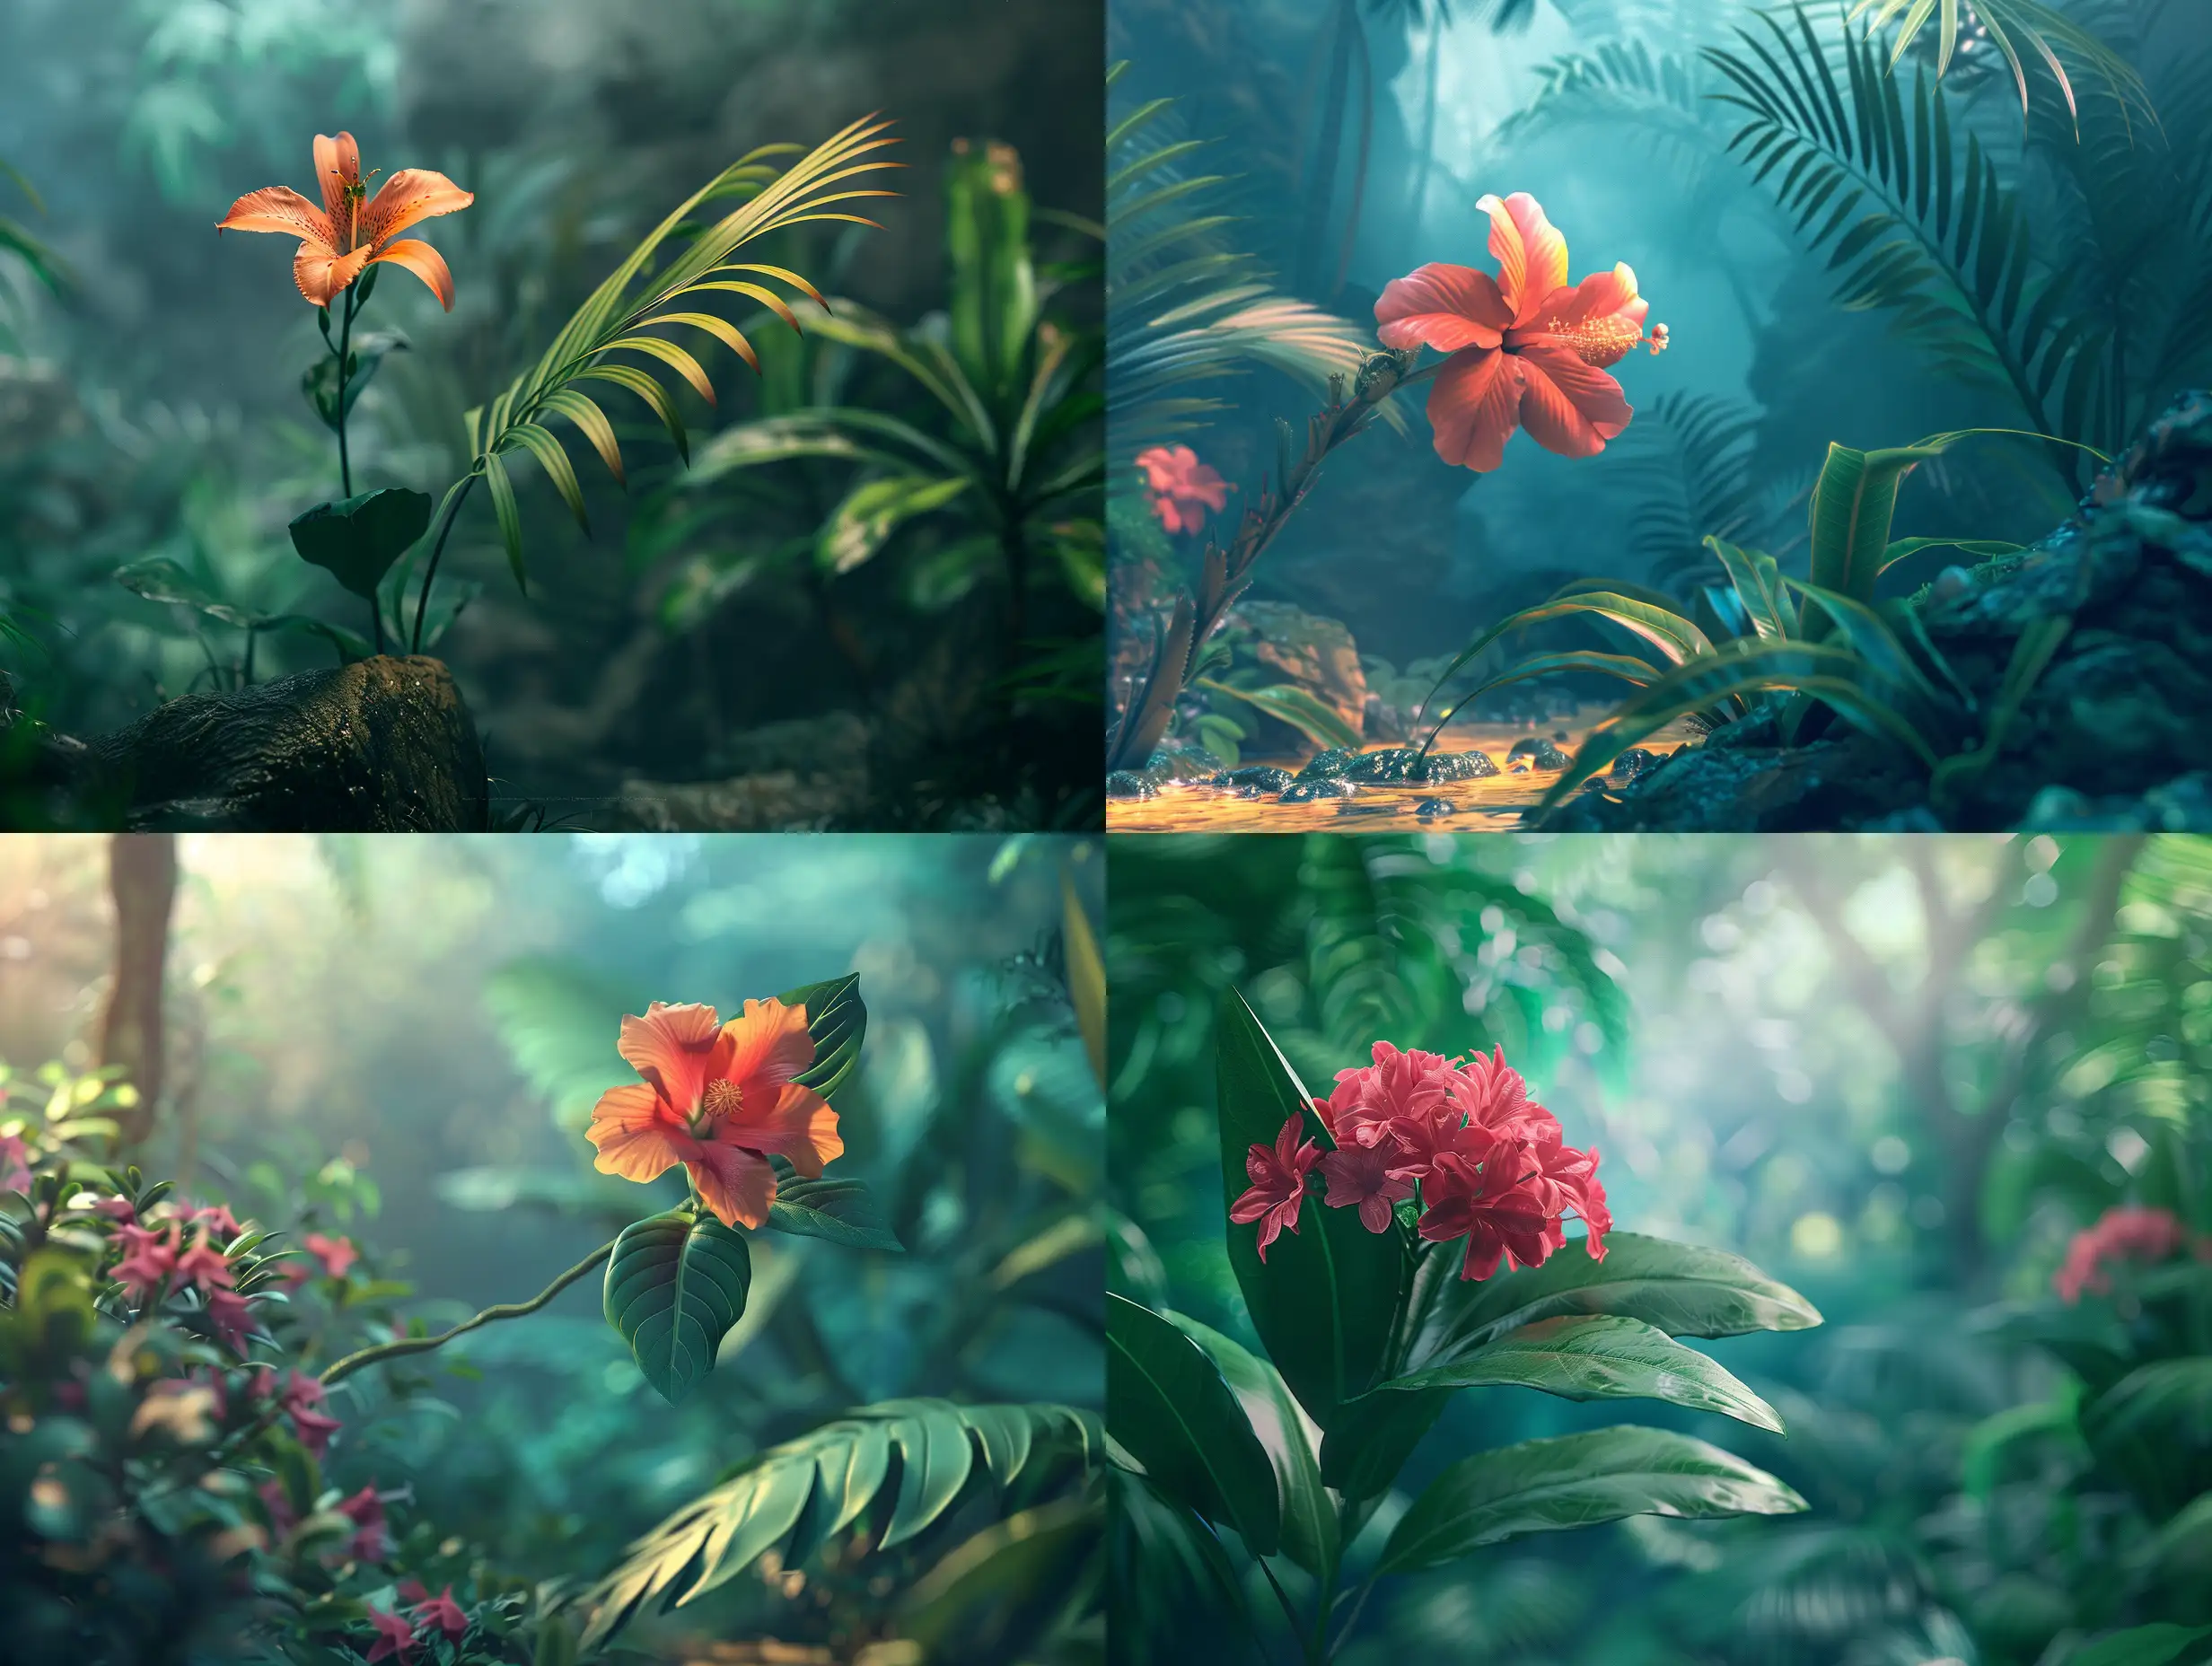  There is a flower from the city of Taif, which is located in Saudi Arabia, on one of the Shifa farms, Landscape, Realism, Cinema 4D, Atmospheric perspective, Vibrant Colors, Jungle, Mirrorless Camera, Cinematic Lighting, Love‎,